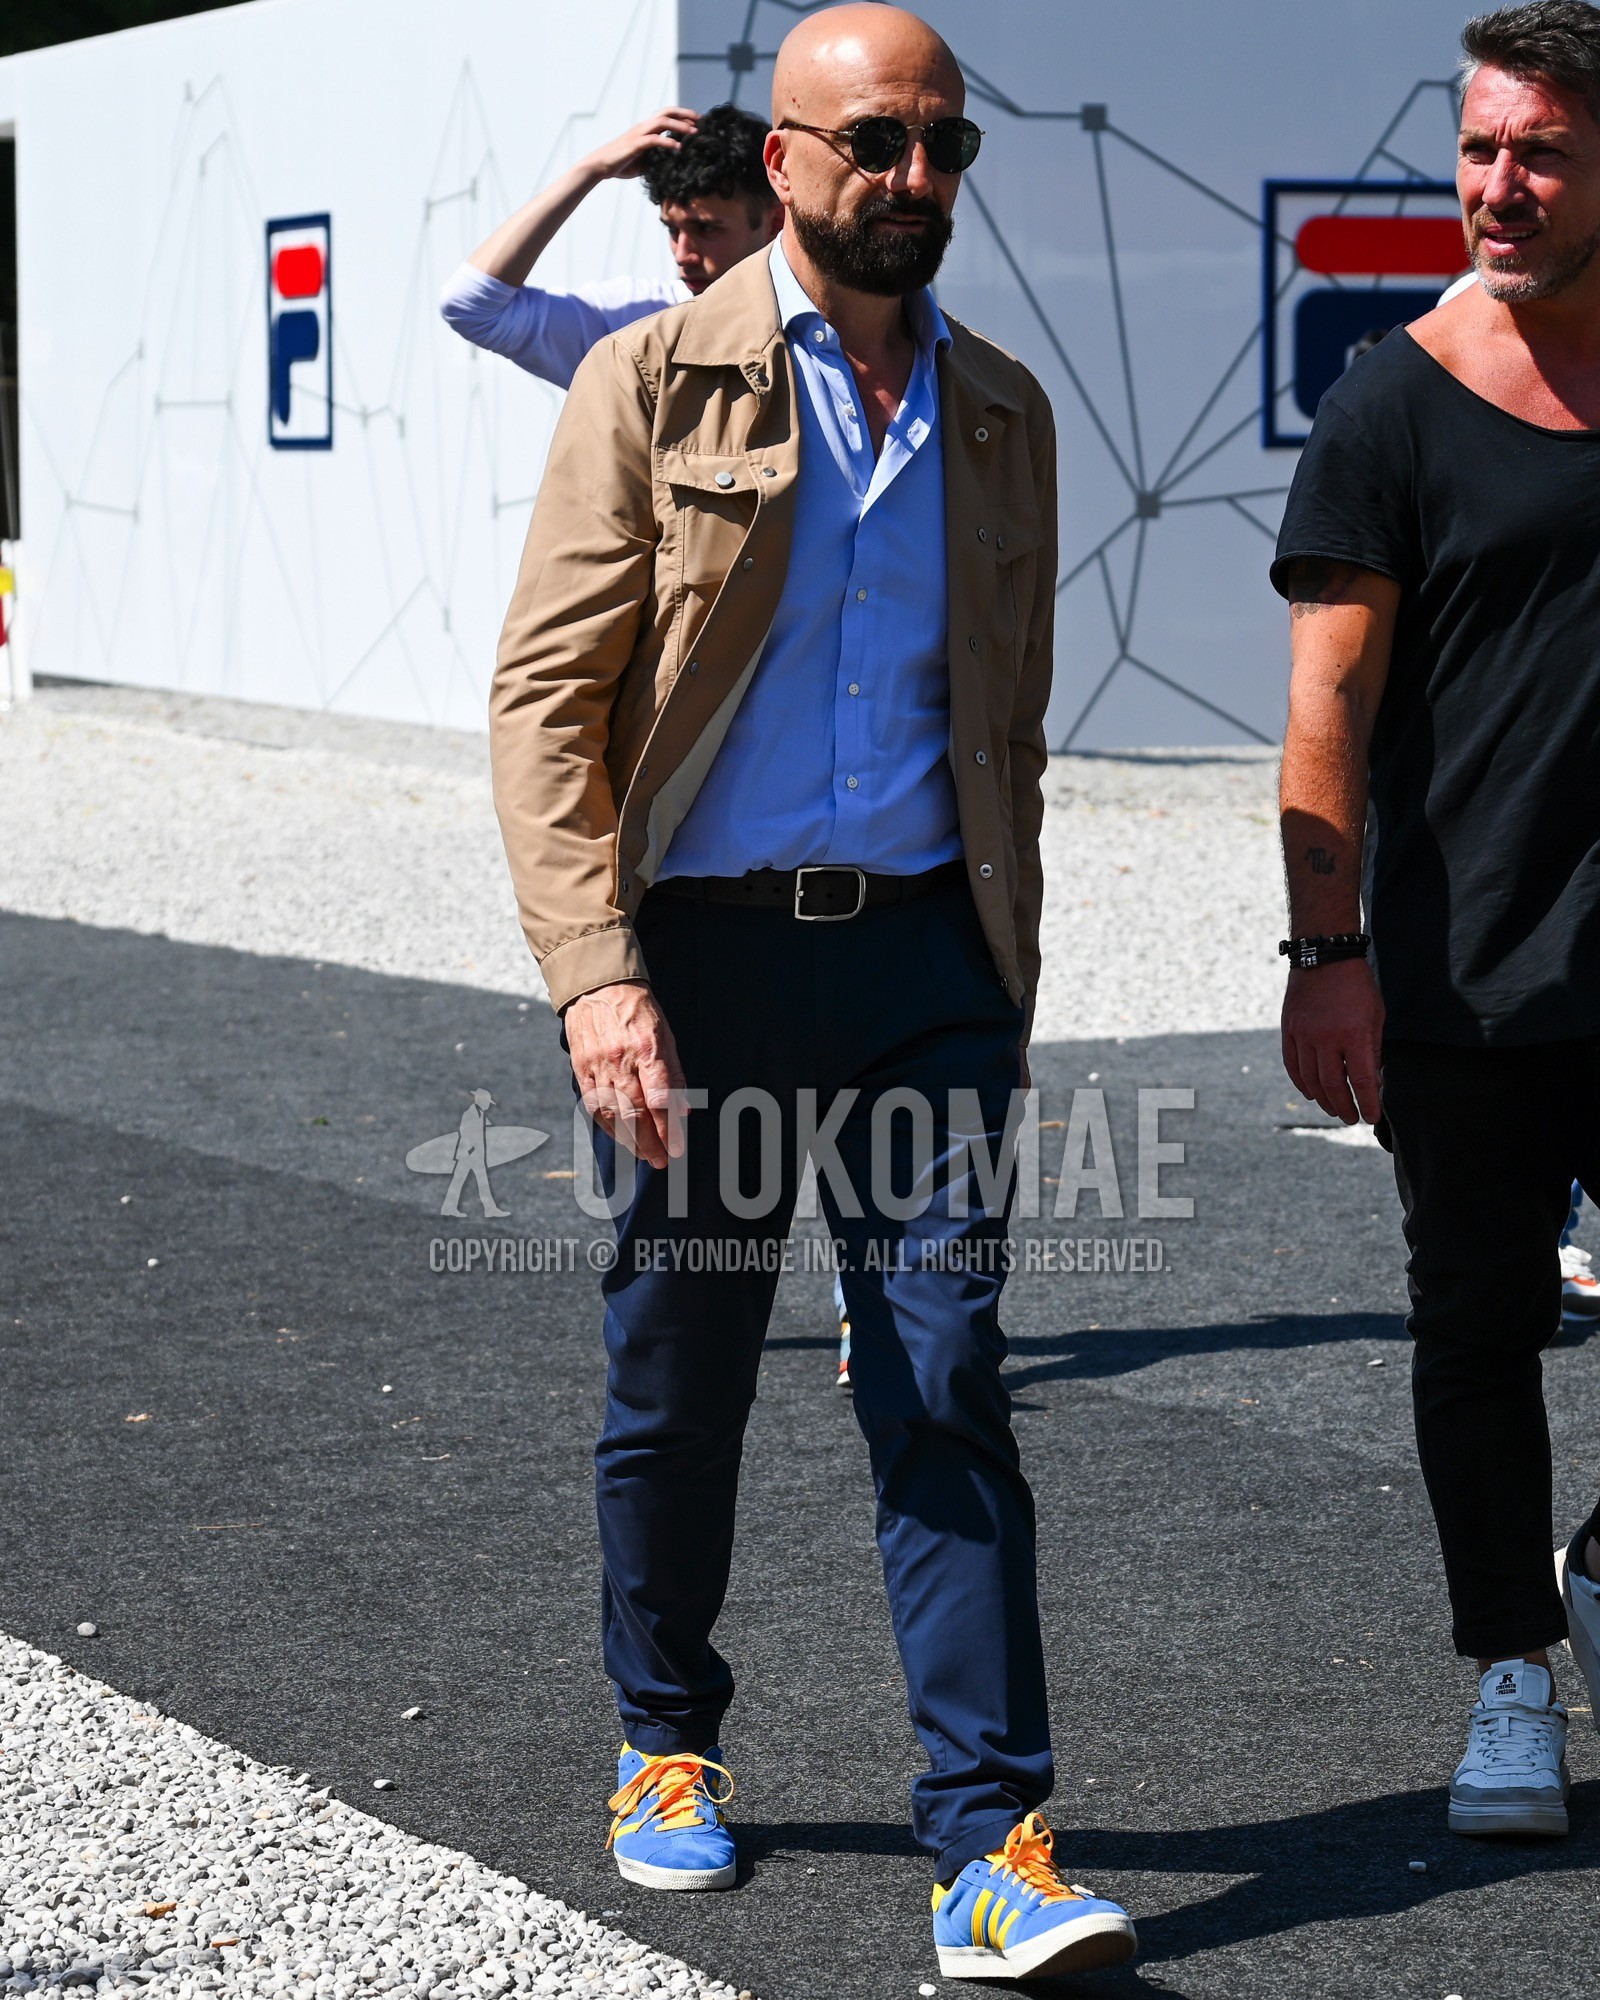 Men's spring summer autumn outfit with black plain sunglasses, beige plain field jacket/hunting jacket, light blue plain shirt, black plain leather belt, navy plain chinos, light blue low-cut sneakers.